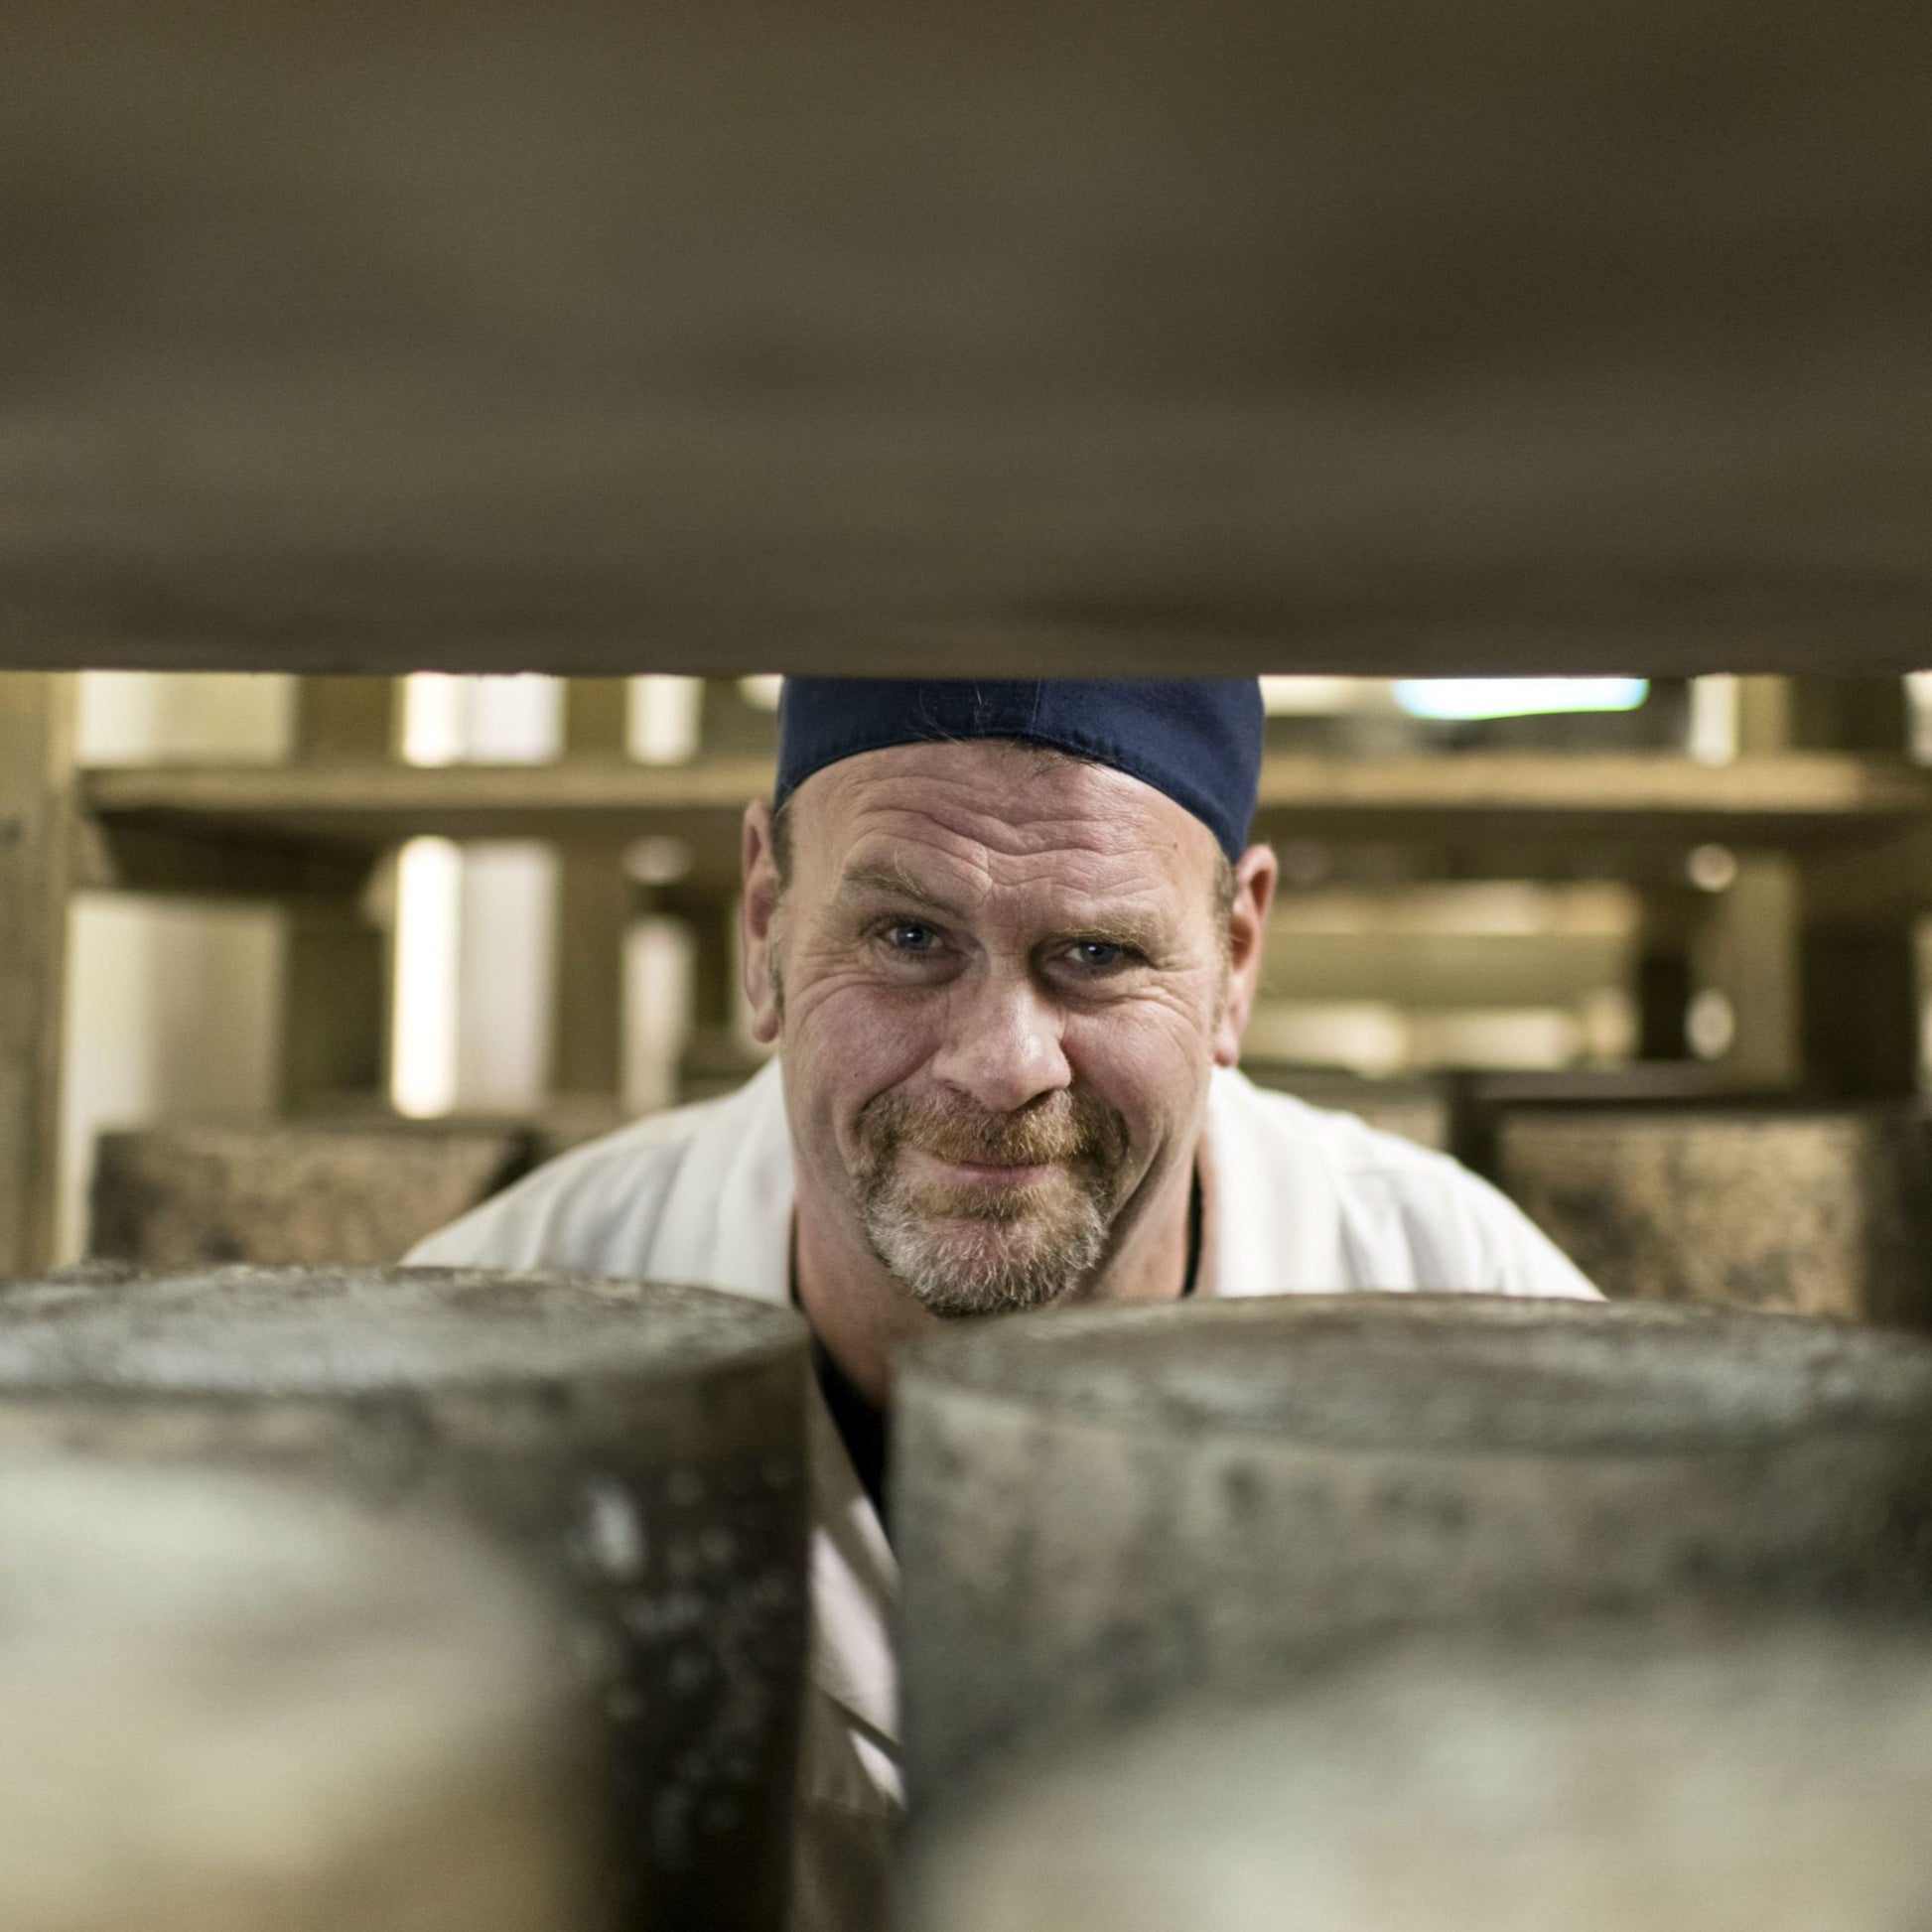 Goodwood's artisan cheesemaker, Bruce Rowan, in the cheese room at Goodwood.